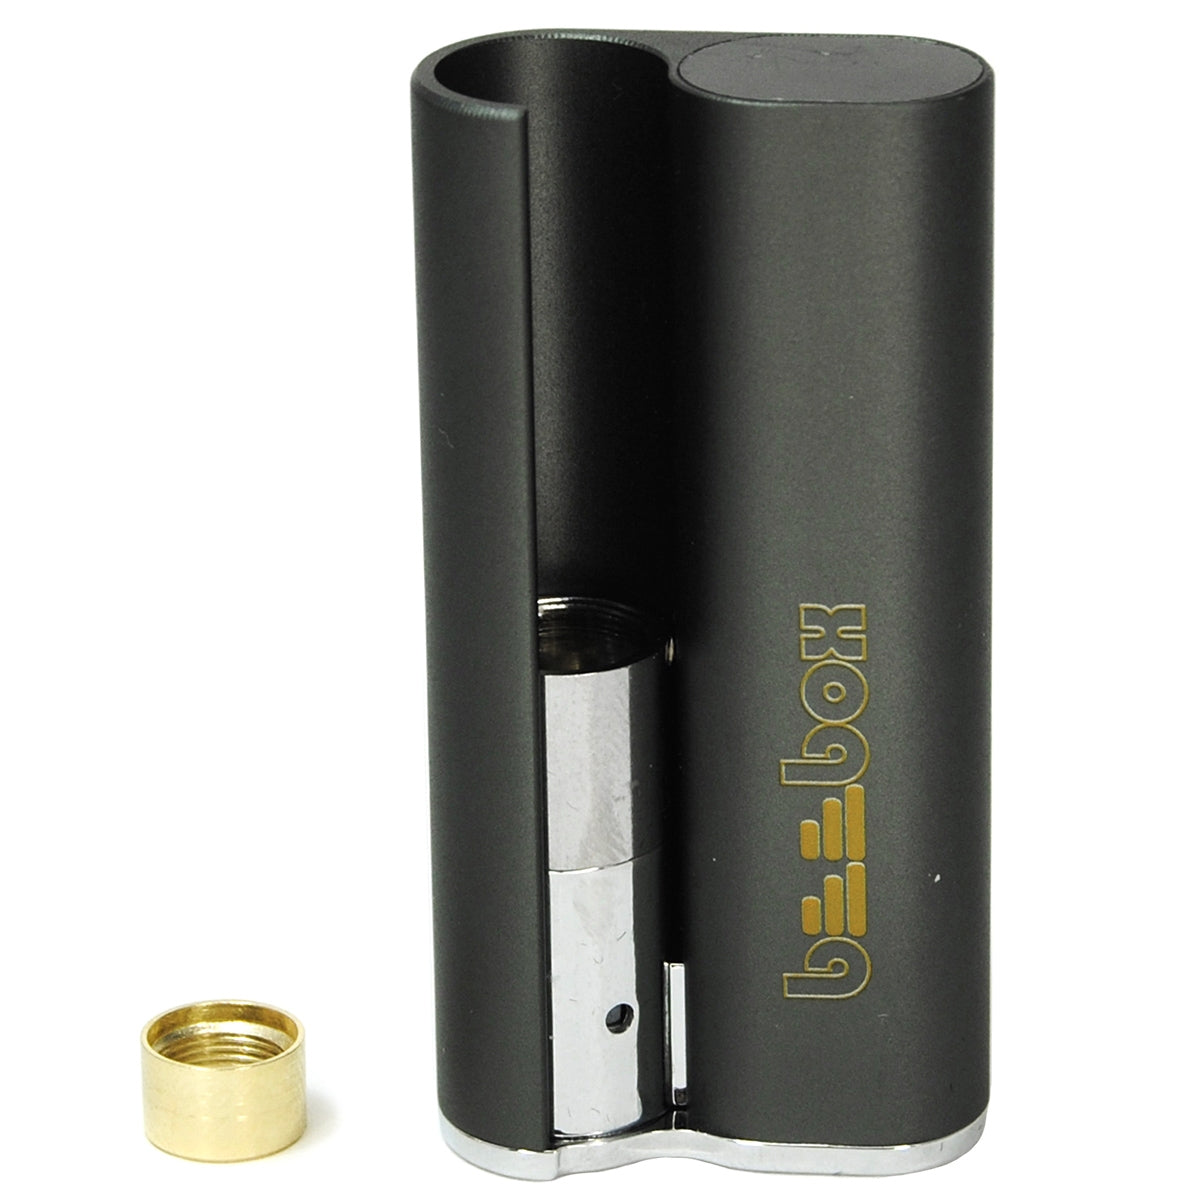 BeeBox Auto-Draw Oil Vaporizer for 510 Thread Cartridges